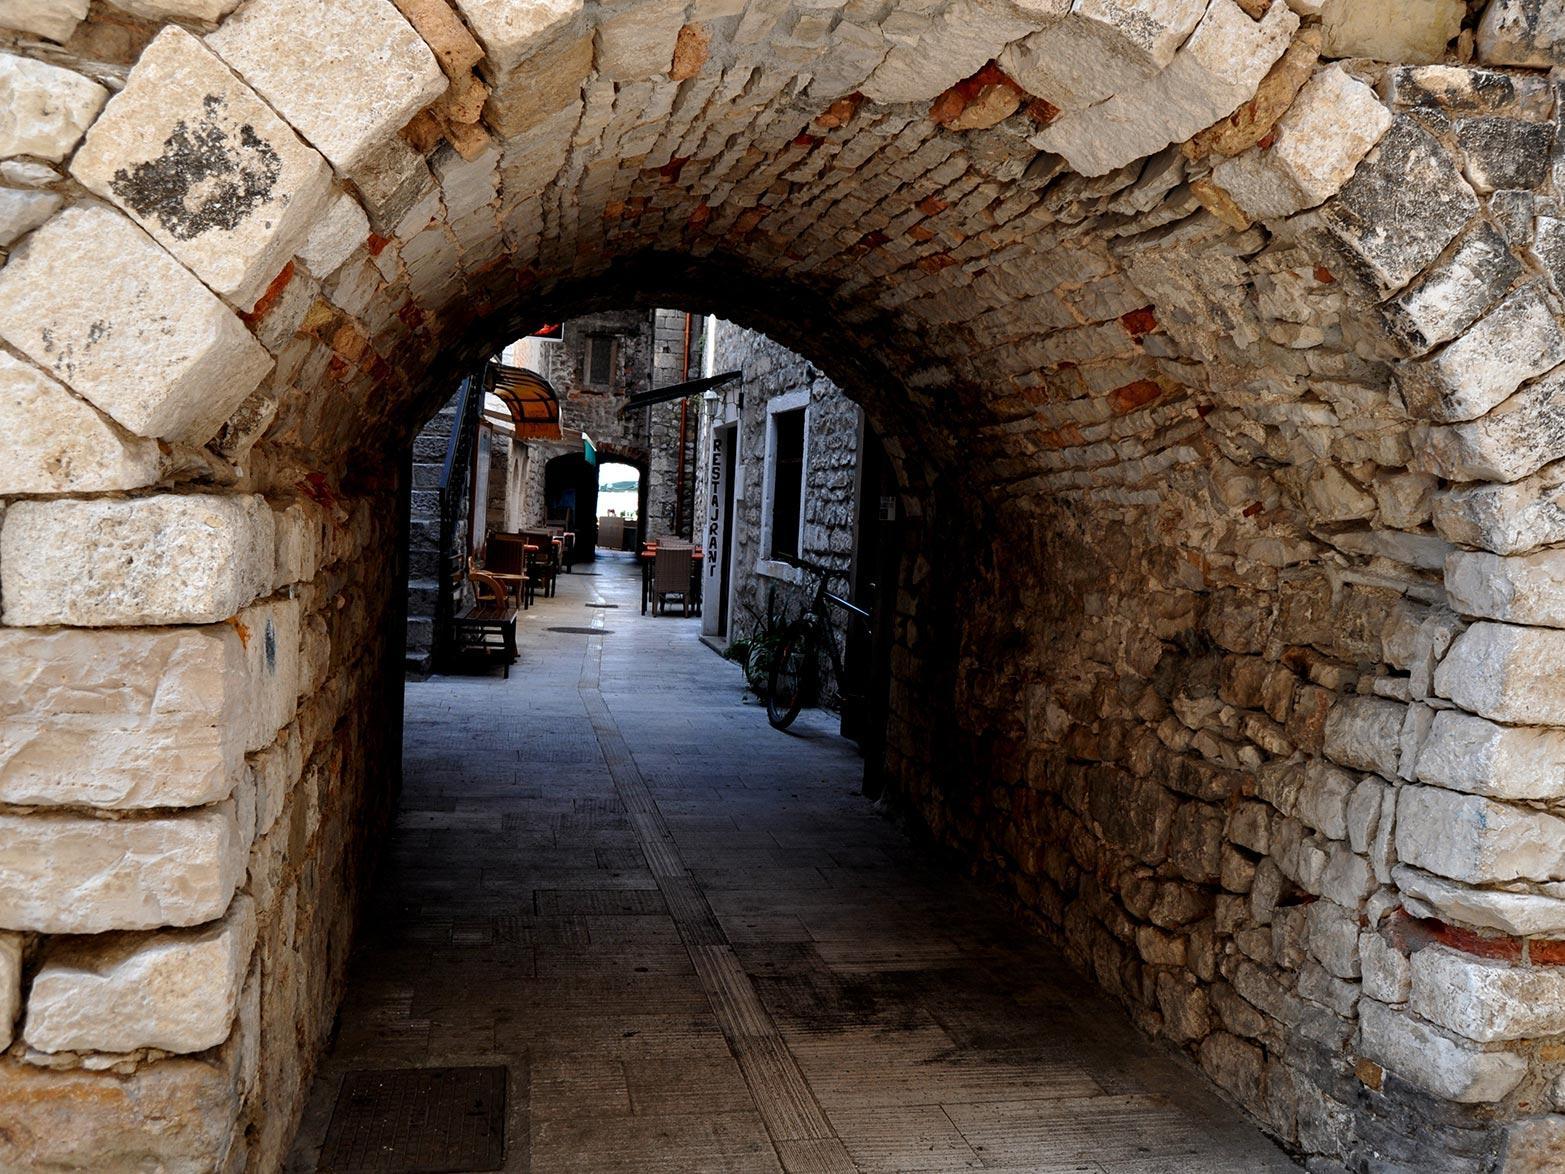 The characteristic Mediterranean architecture of Trogir